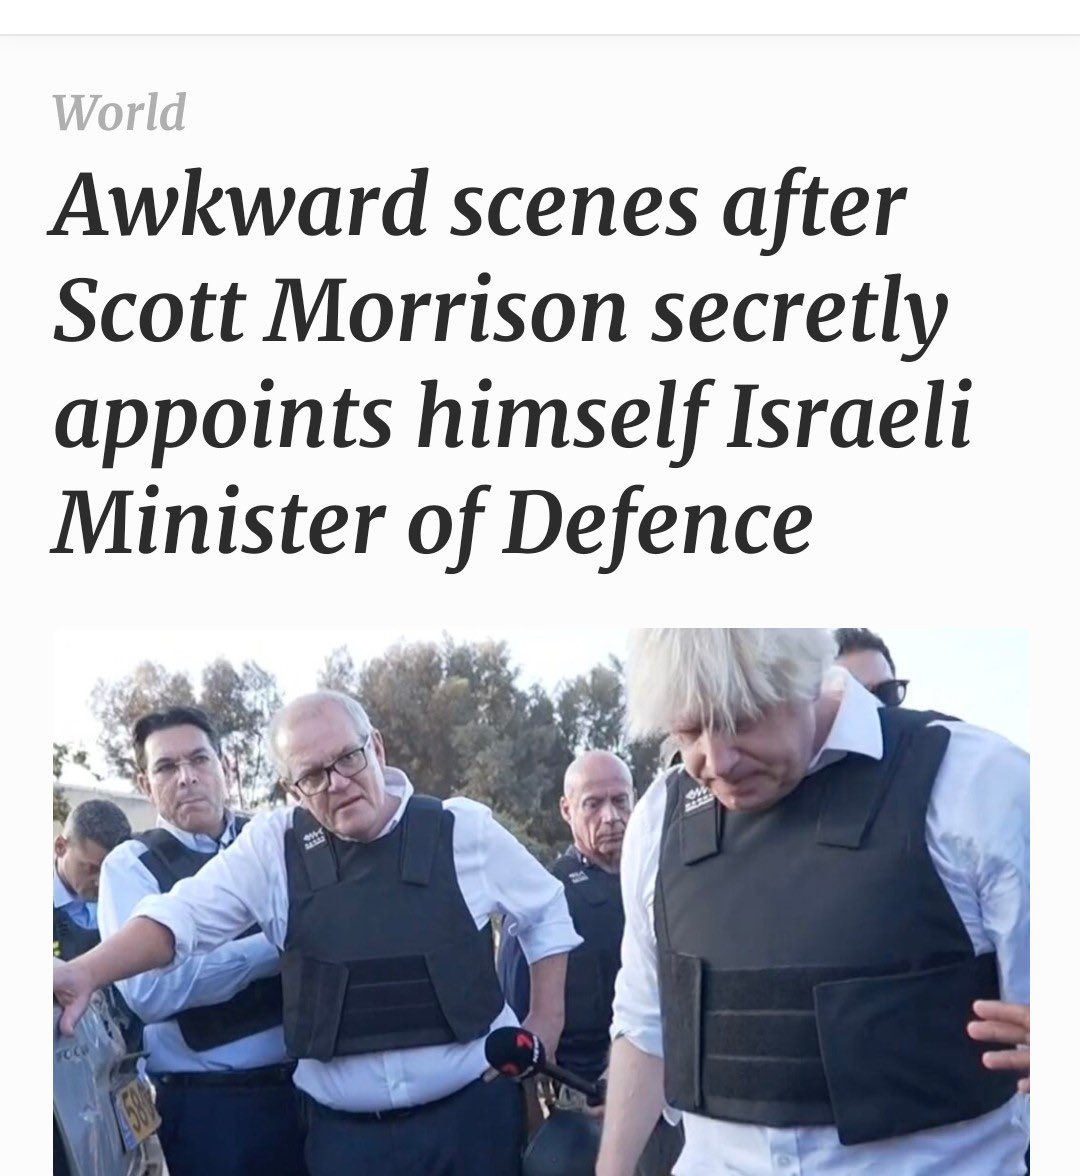 Sinister failed PM Scott Morrison cosplaying in Israel #crookfromCook #scottythefailure